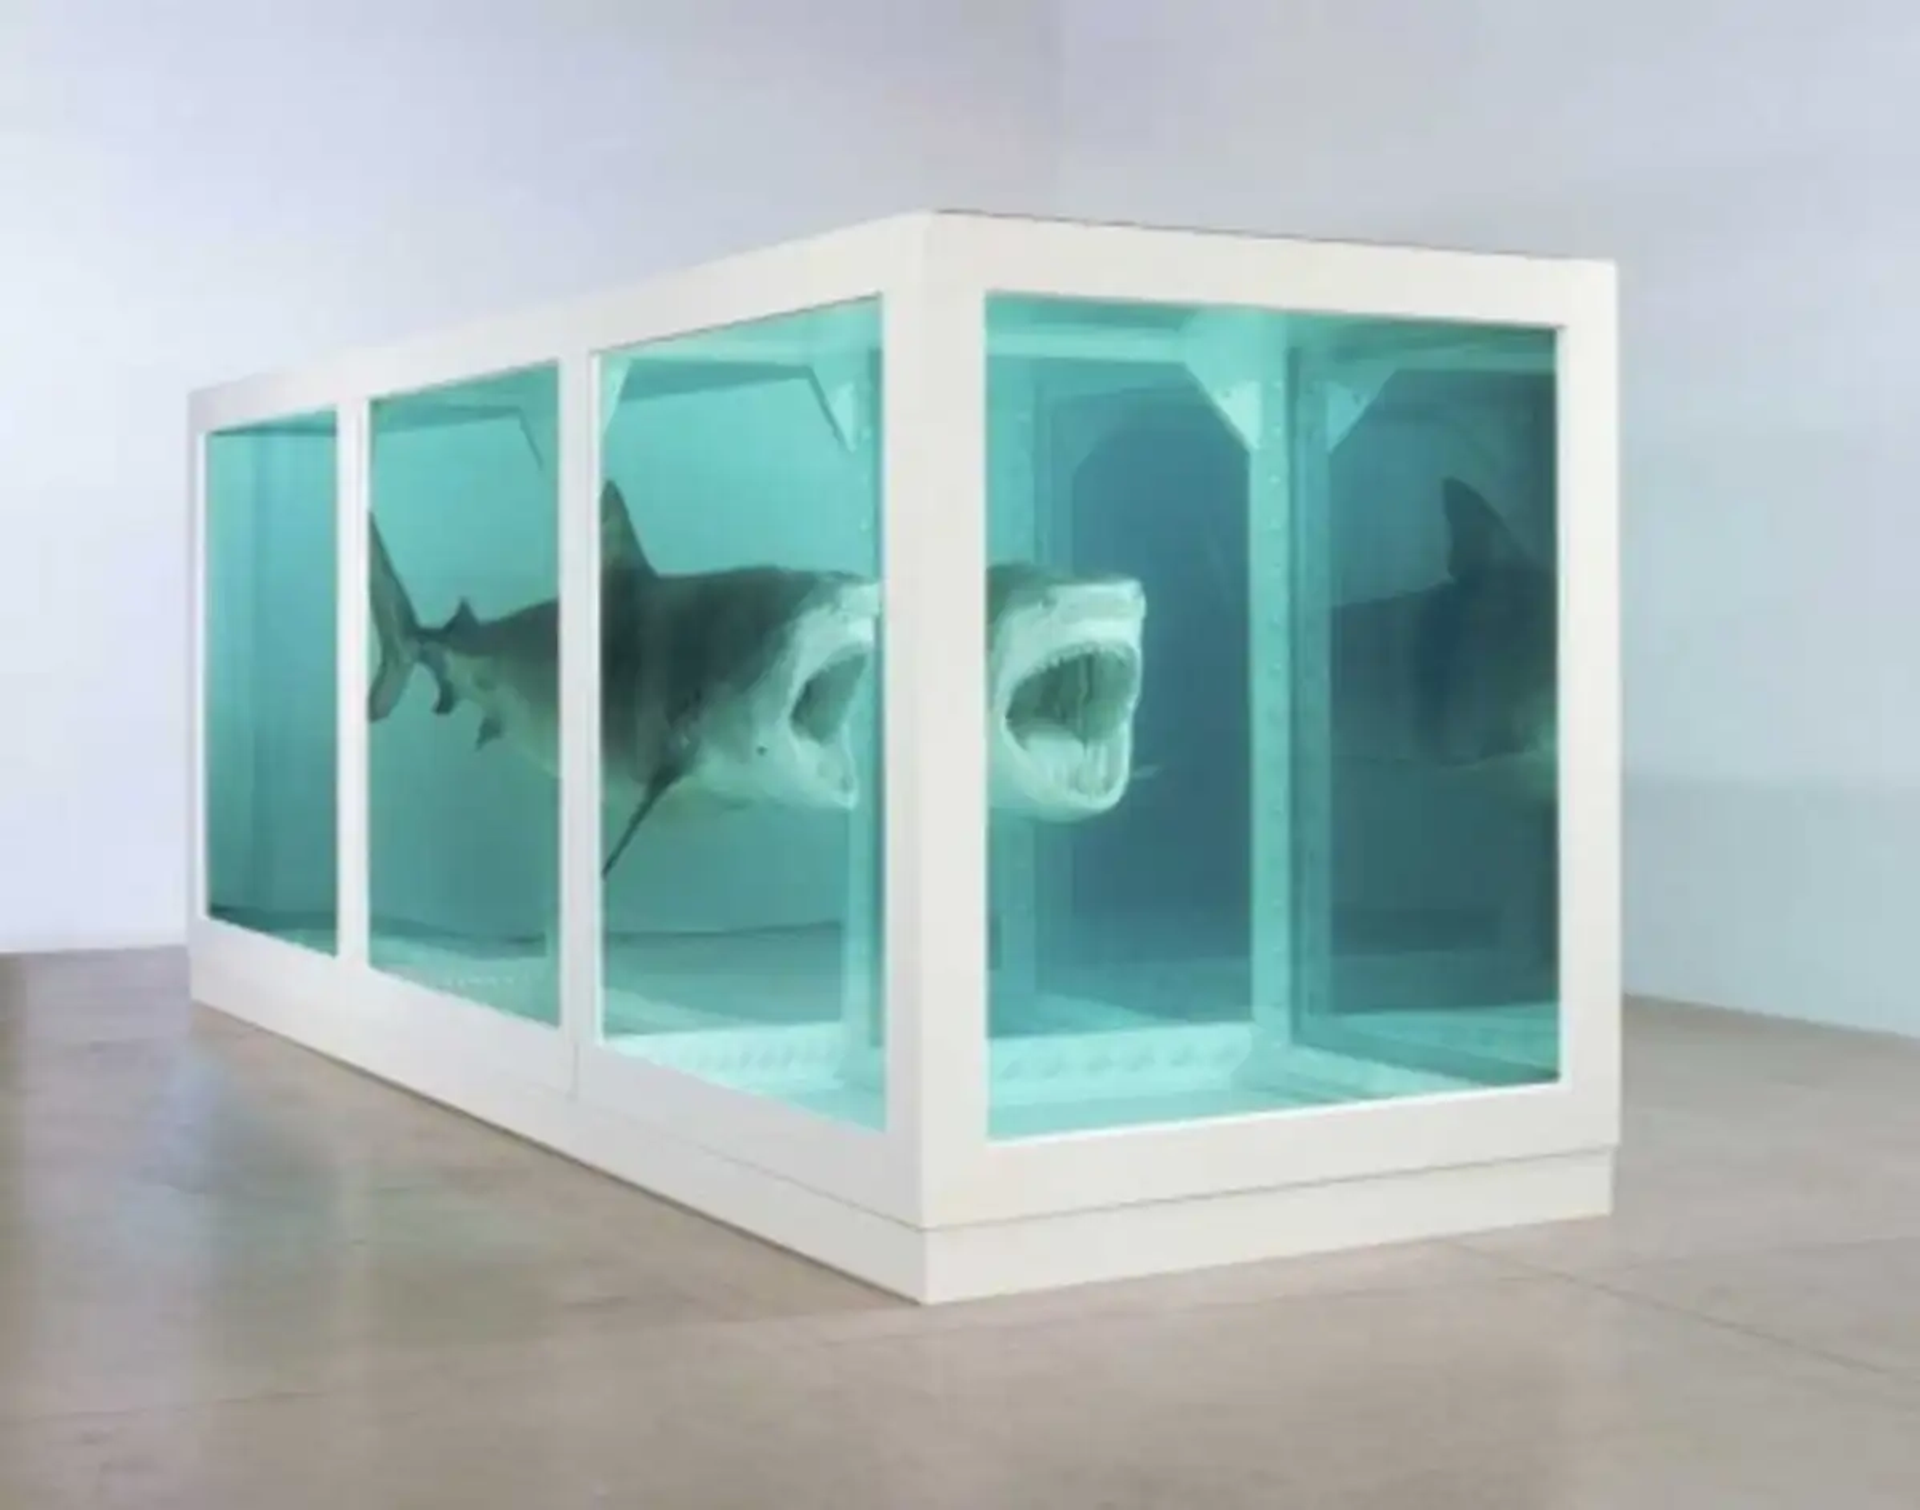 An image of the work The Physical Impossibility Of Death In The Mind Of Someone Living by Damien Hirst. It shows a large tiger shark preserved in formaldehyde, within a large glass tank divided in three sections by white frames.